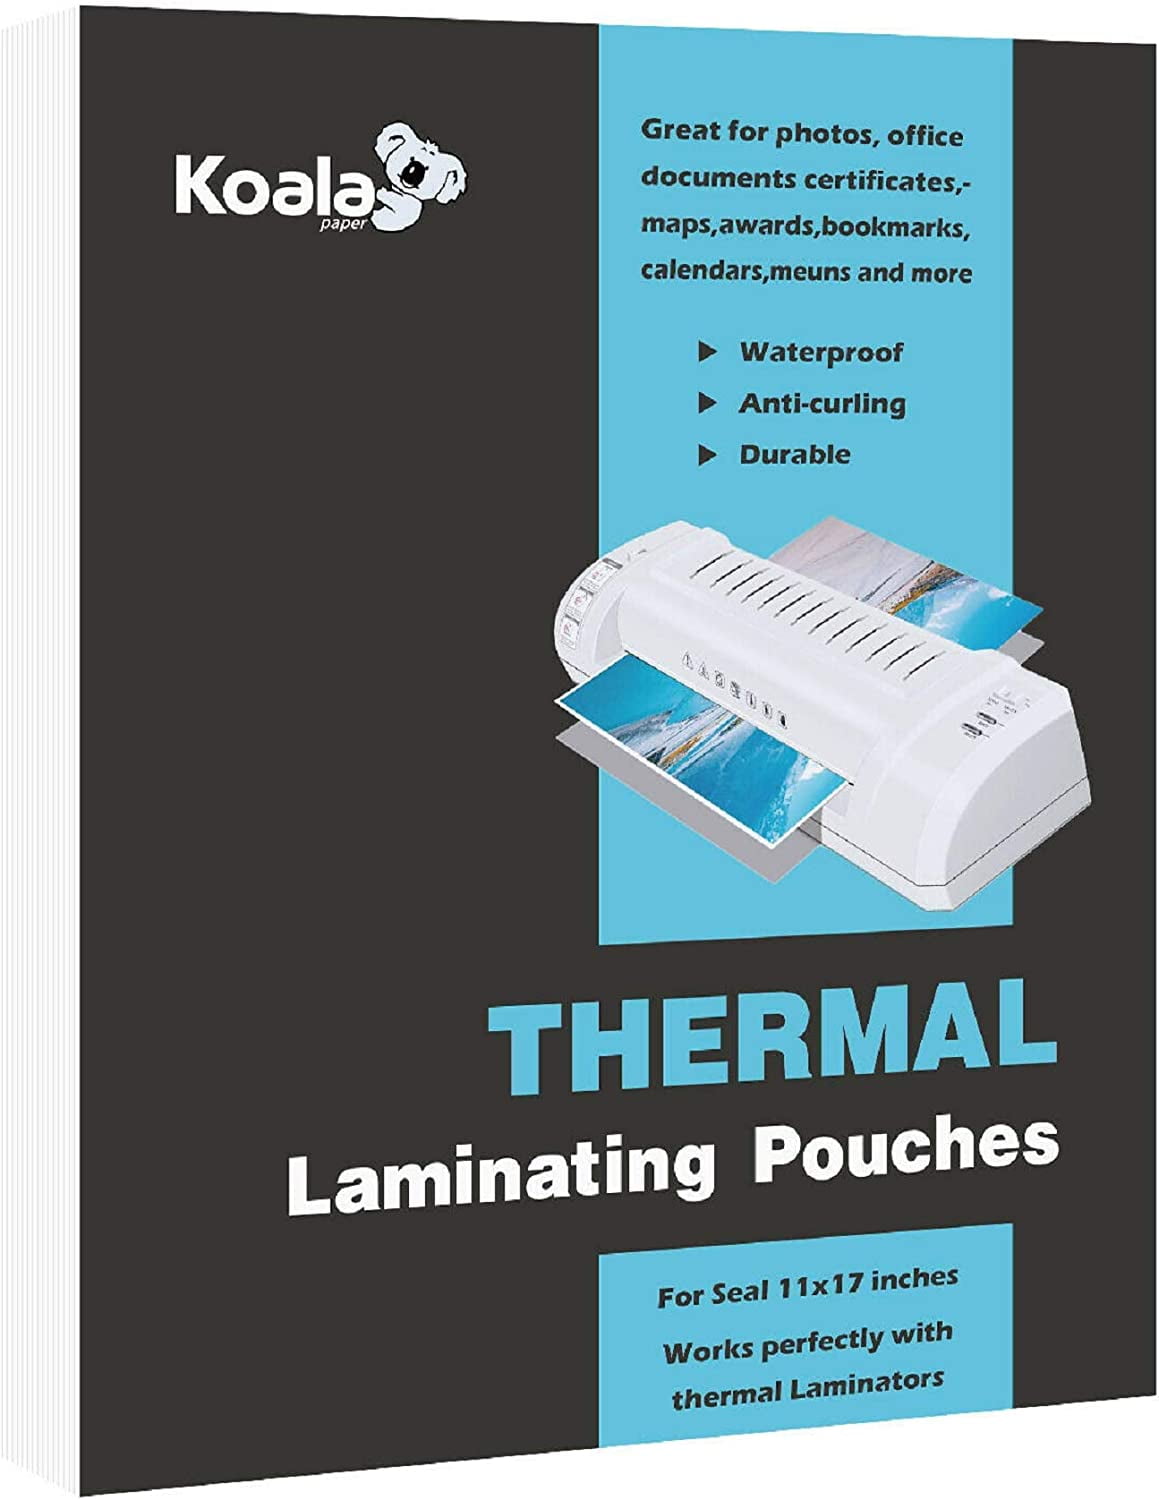 Legal Size 100 Per Box Compatible with Most Pouch Laminating Machines TruLam Laminating Pouches 3 Mil Thickness 9-Inch by 14-1/2-Inch Matte/Matte 